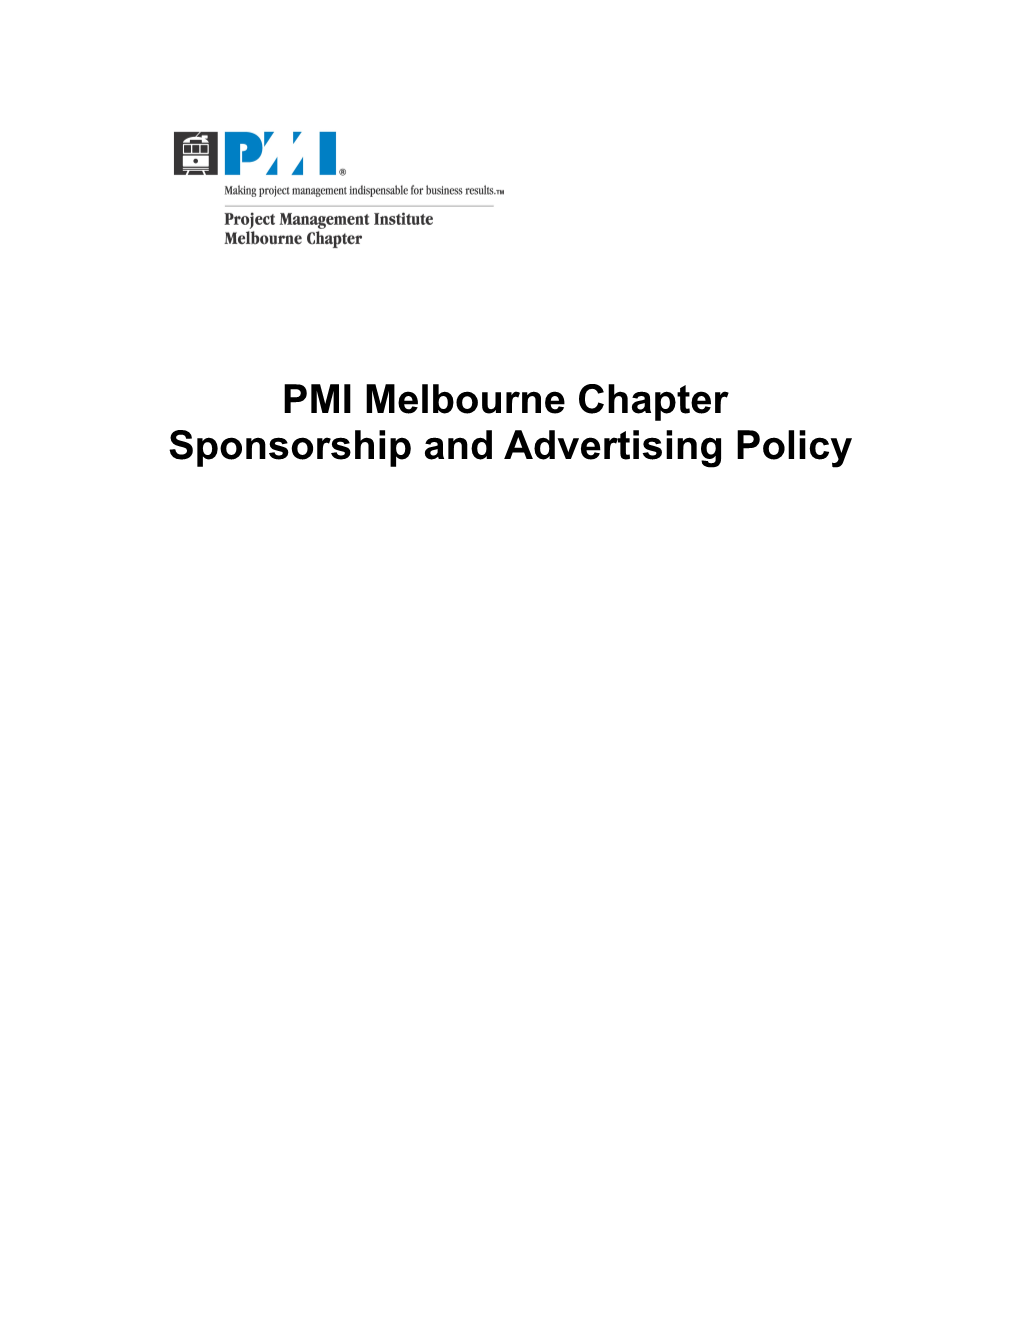 PMI Melbourne Sponsorship and Advertising Policy